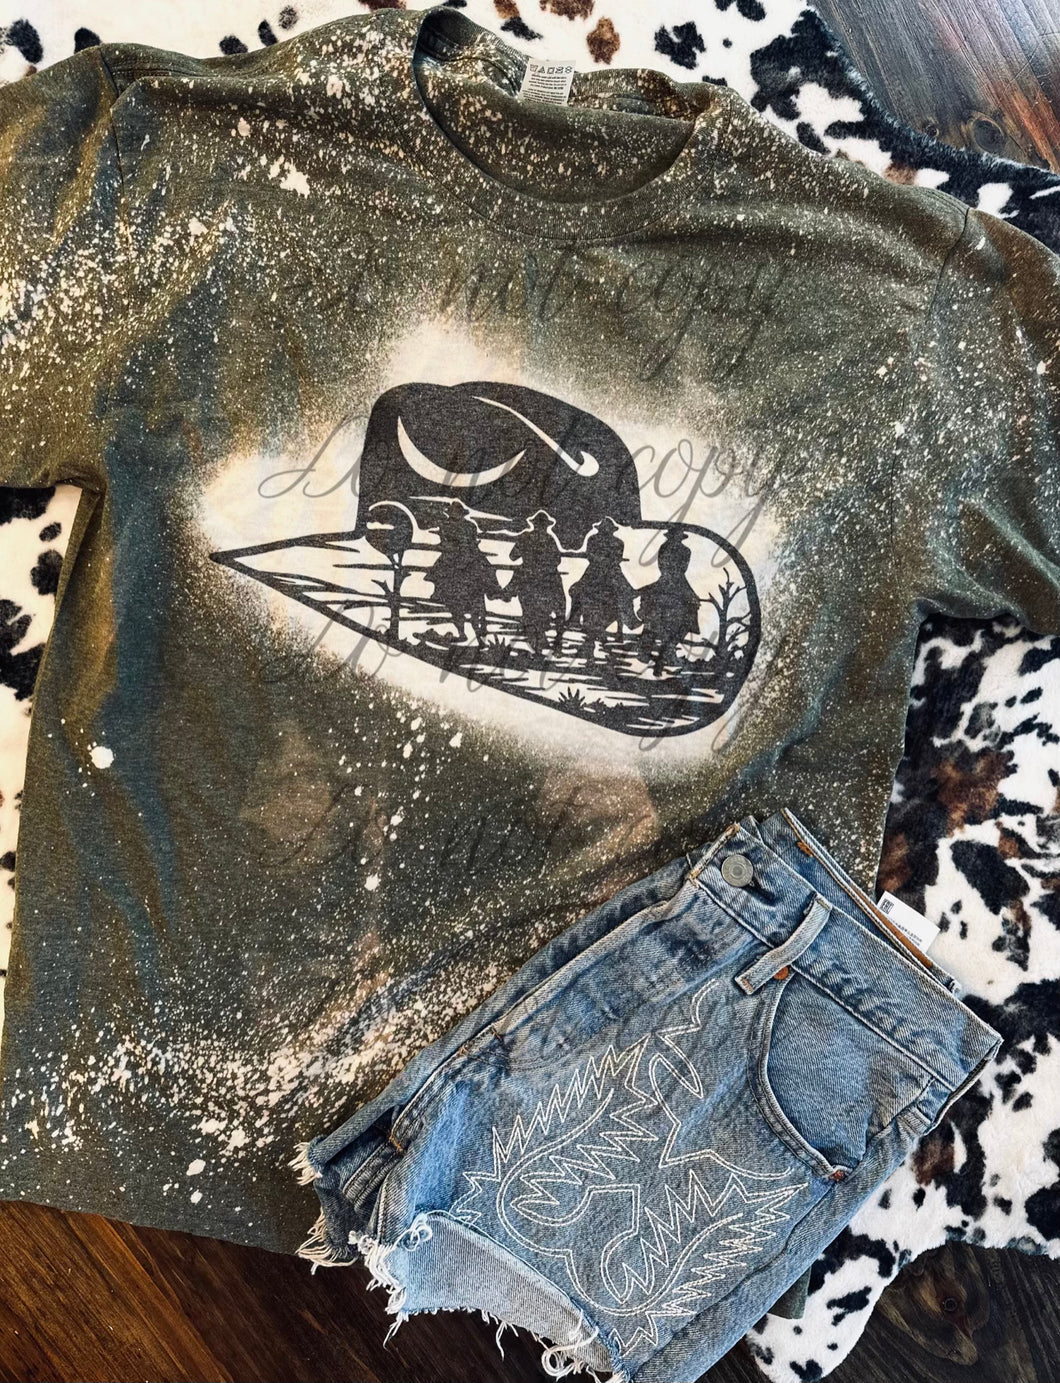 Bleached desert and cowboys graphic tee or sweatshirt graphic tee or sweatshirt - Mavictoria Designs Hot Press Express